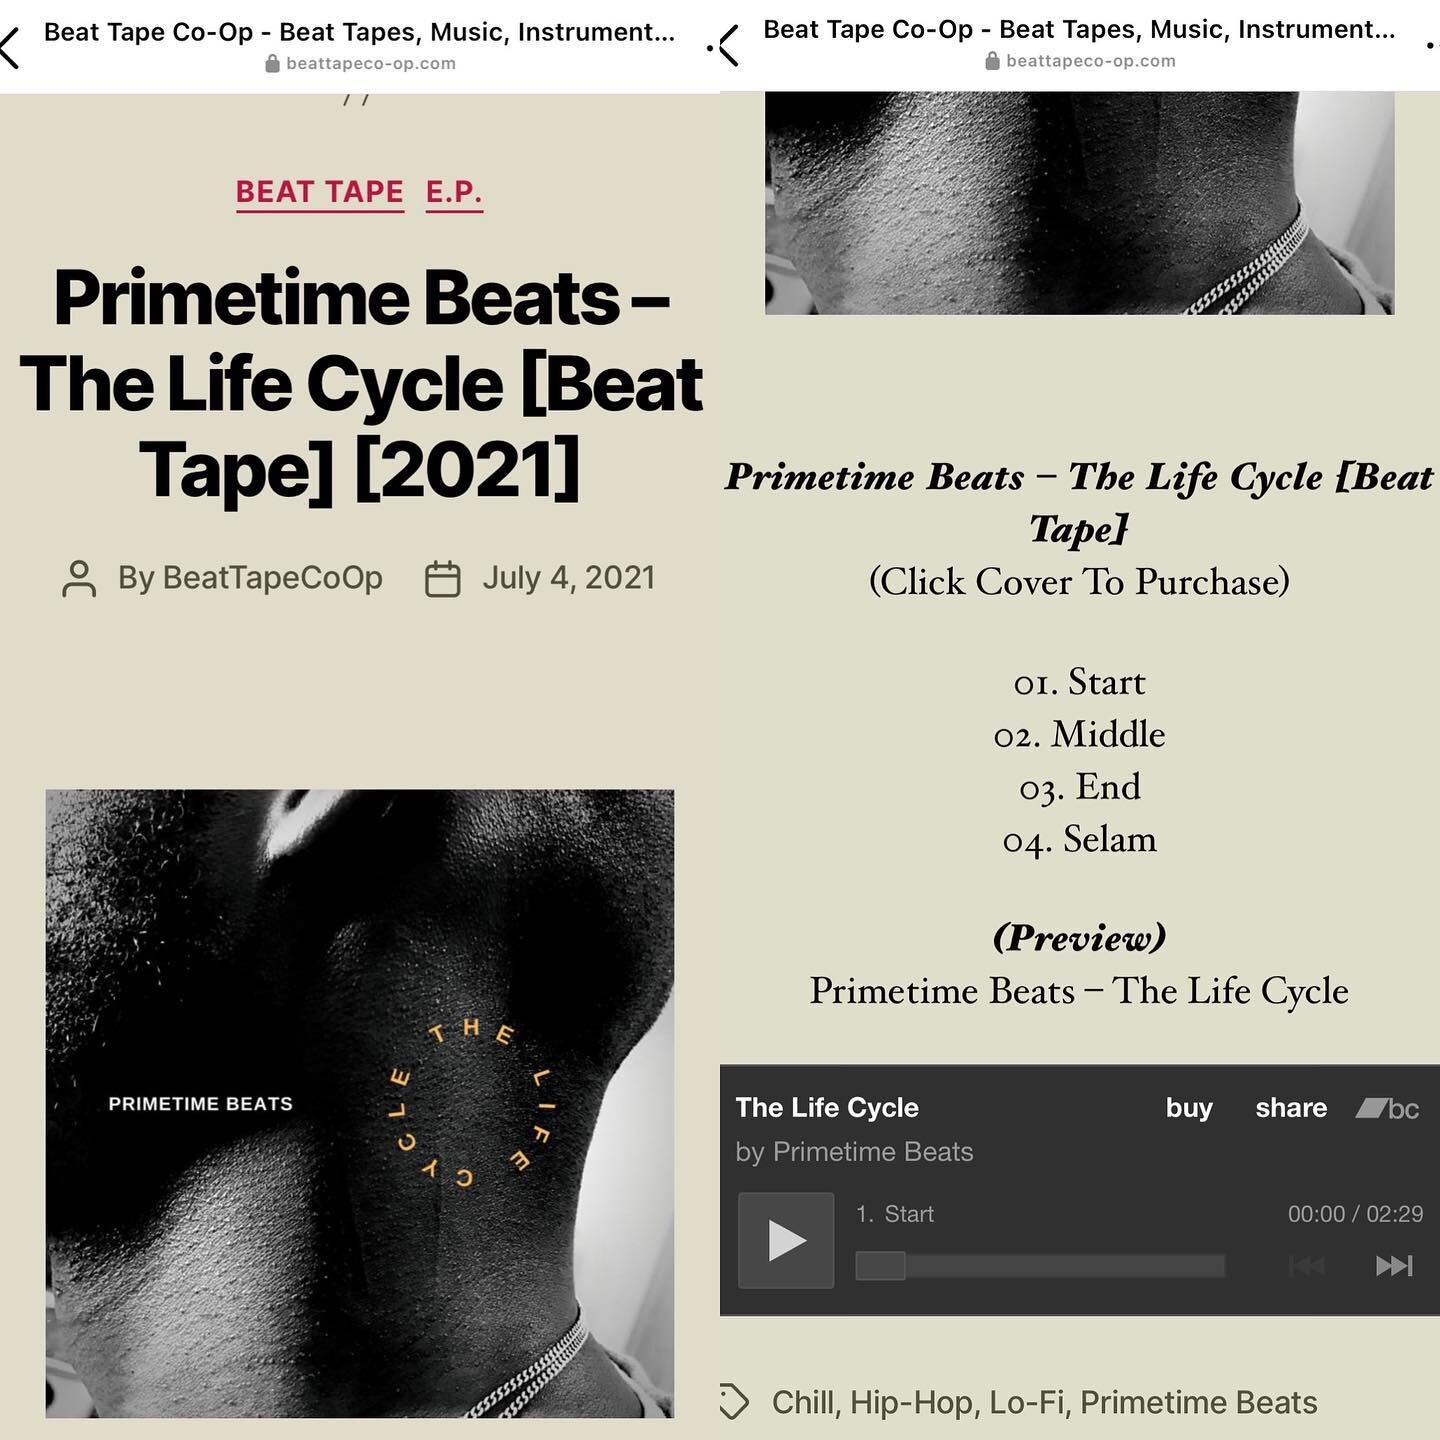 Shout out to @beat_tape_co_op for featuring 🔁 &ldquo;The Life Cycle&rdquo; 🔁 EP.

Quick story. The @beat_tape_co_op was one of the first sites to feature my first instrumental project back in 2016.

Visit their site for all instrumental tapes and a